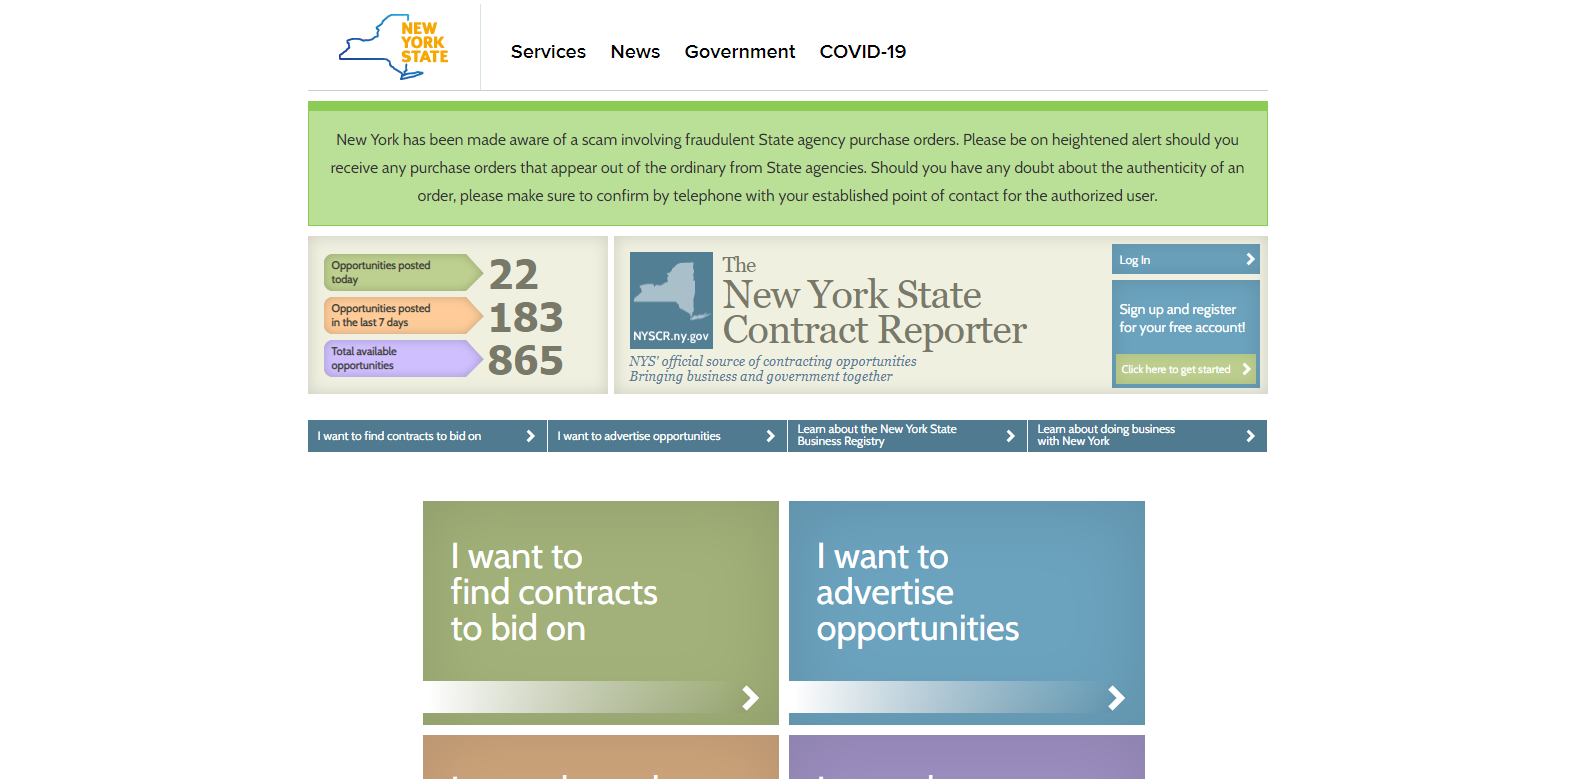 NYS contract reporter